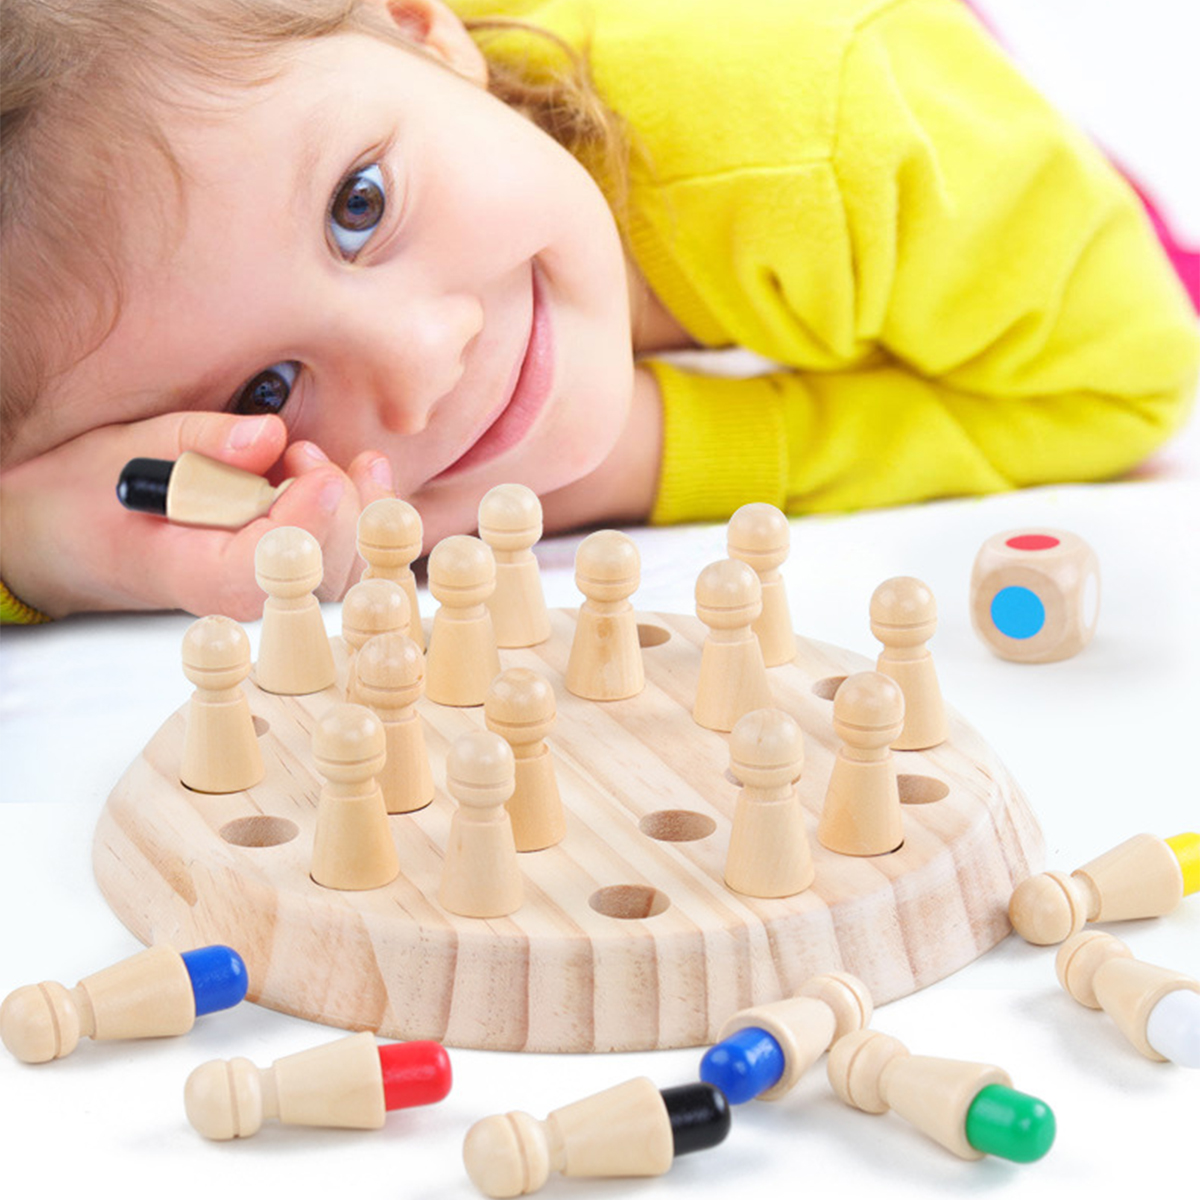 Montessori-Wooden-Colorful-Memory-Chess-Game-Clip-Beads-3D-Puzzle-Learning-Educational-Toys-for-Chil-1723192-3